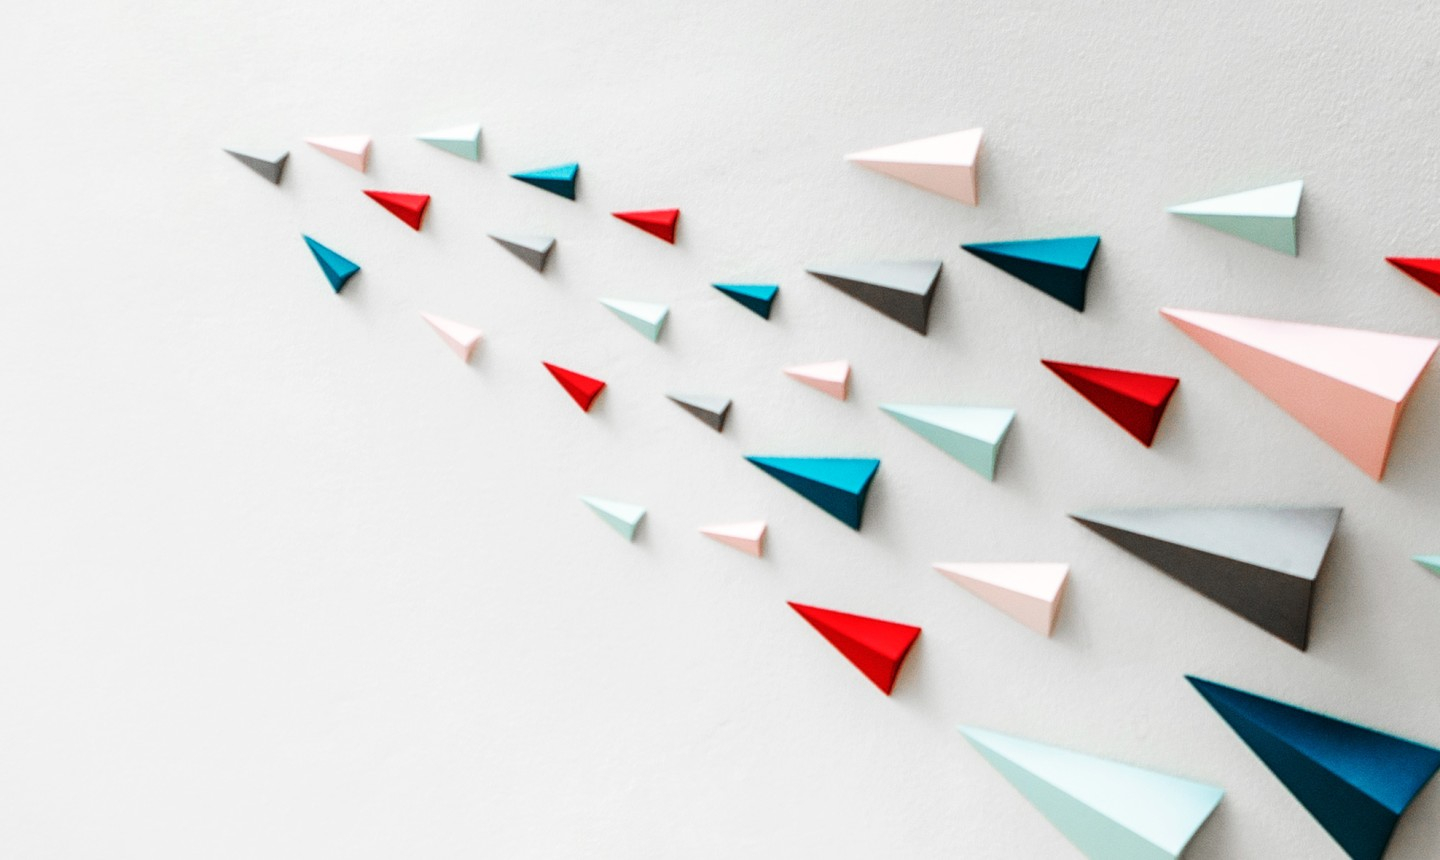 How To Make 3D Origami Pieces Transform Your Boring Walls With The Magic Of Origami